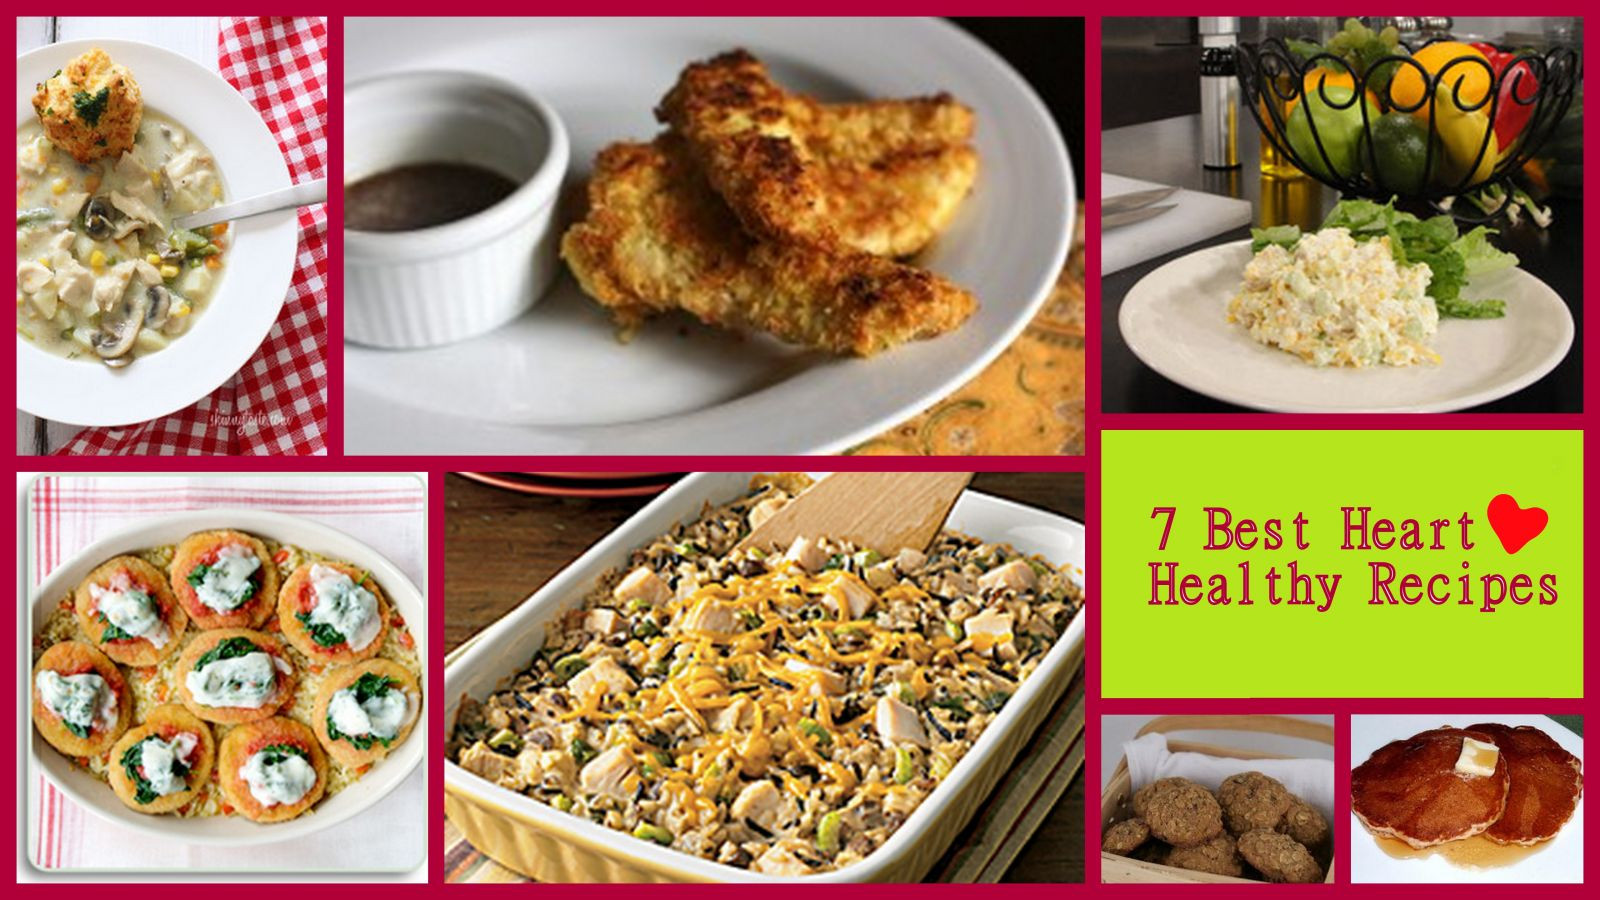 Heart Healthy Diet Recipes
 7 Best Heart Healthy Recipes